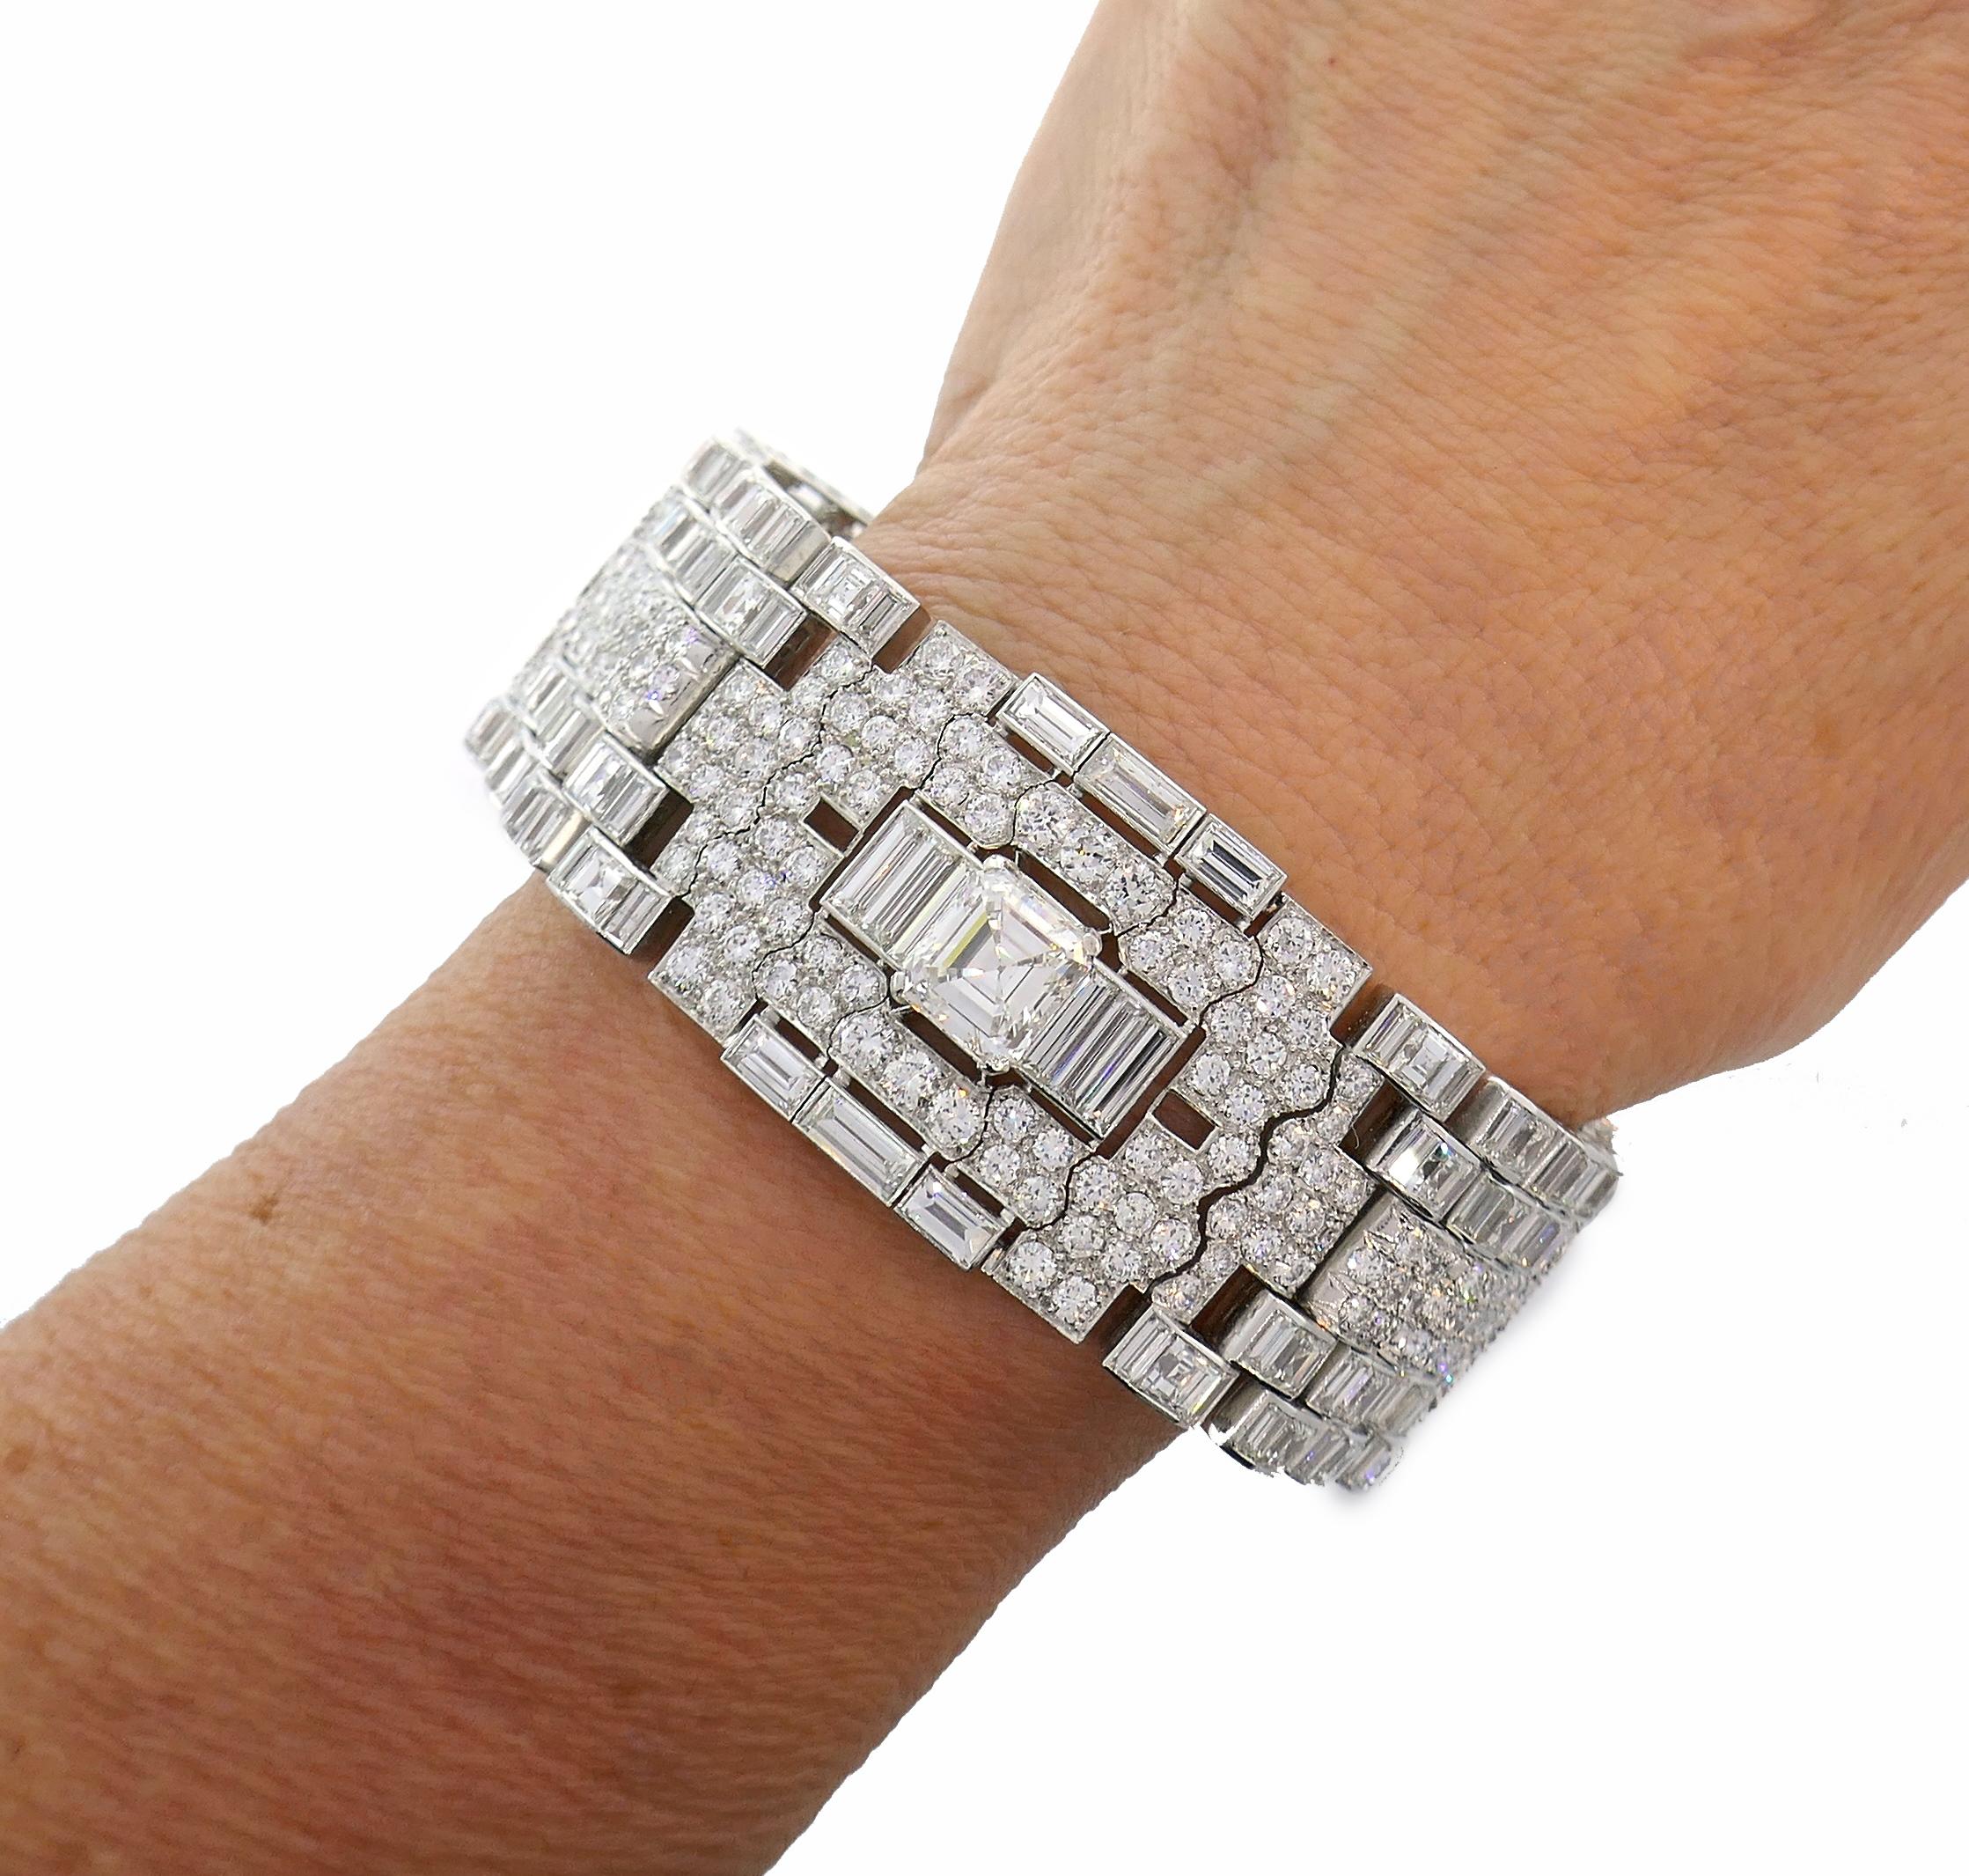 Stunning Art Deco Revival bracelet created in the 1960s. It is made of platinum, features three emerald cut diamonds and encrusted with round brilliant and step cut diamonds. The three larger emerald cut diamonds are: the diamond in the center